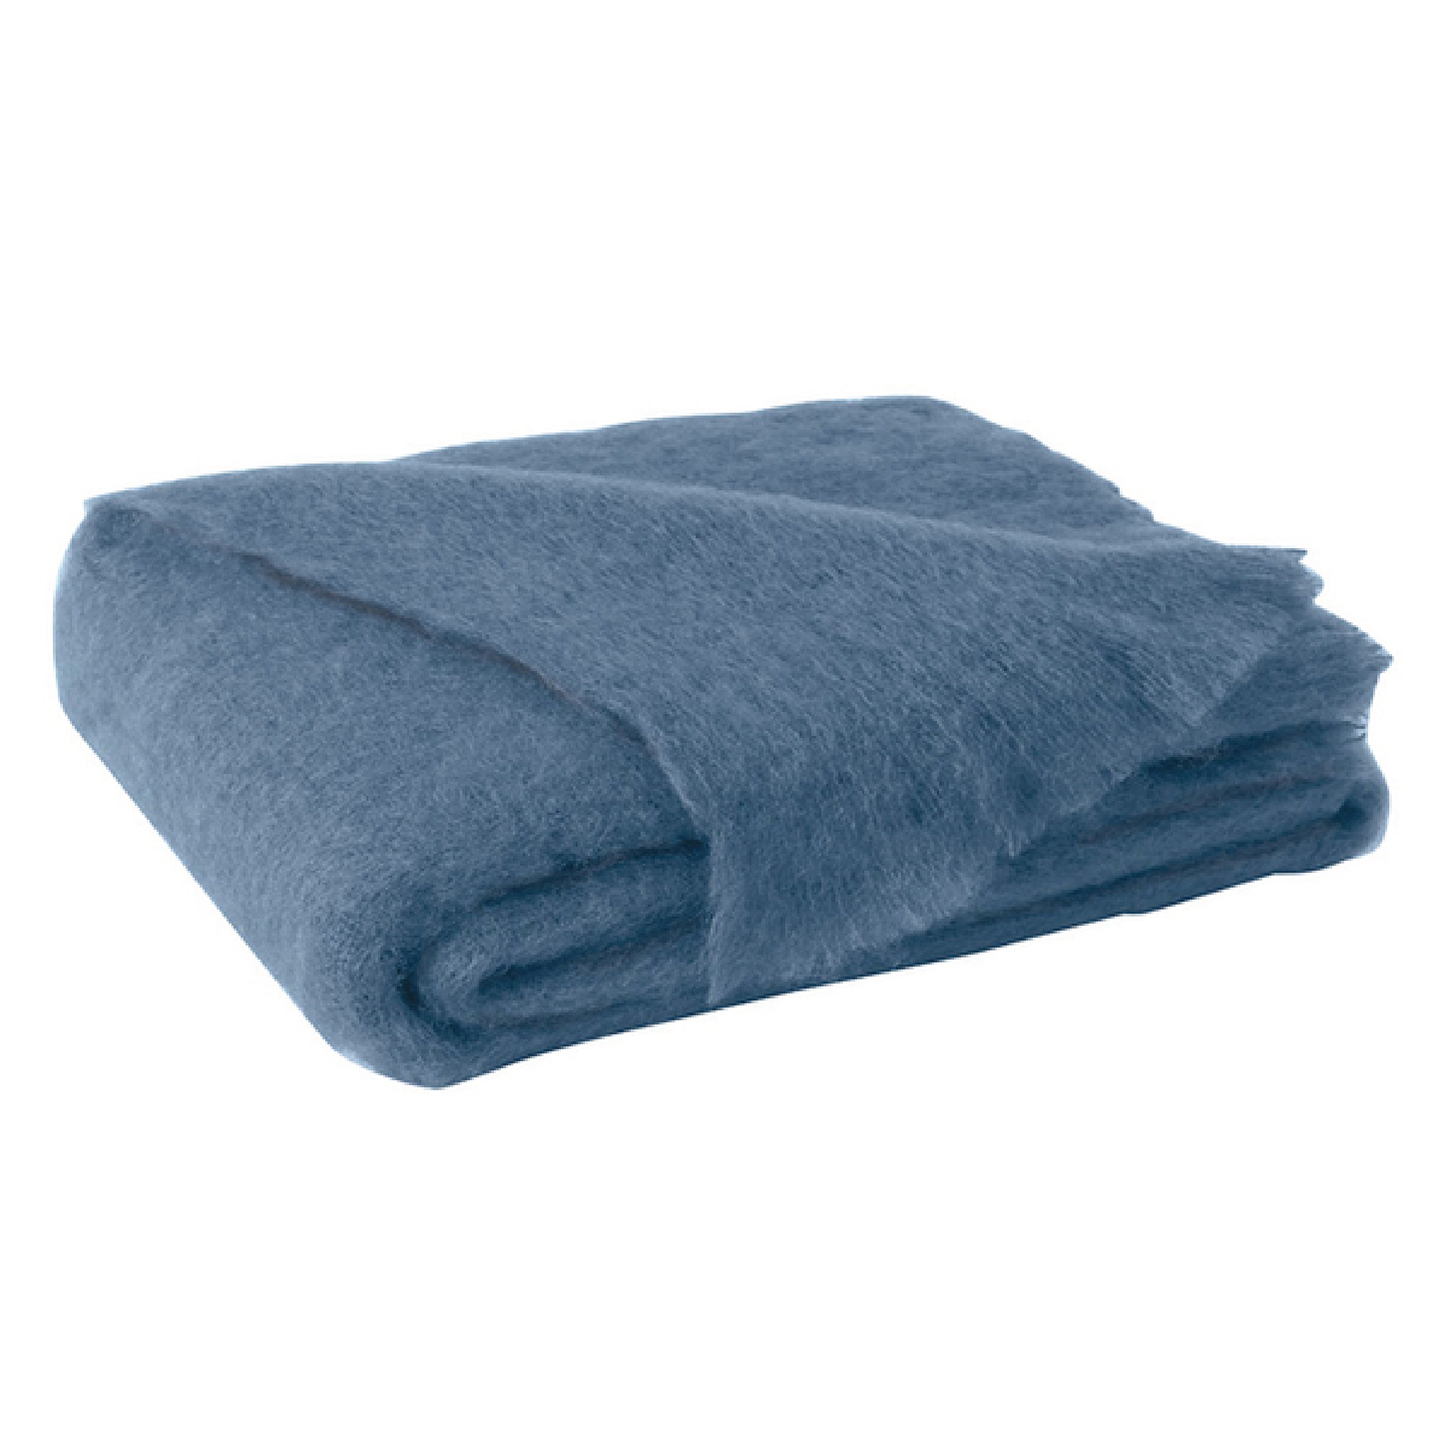 Brushed Mohair Throw - multiple colors available